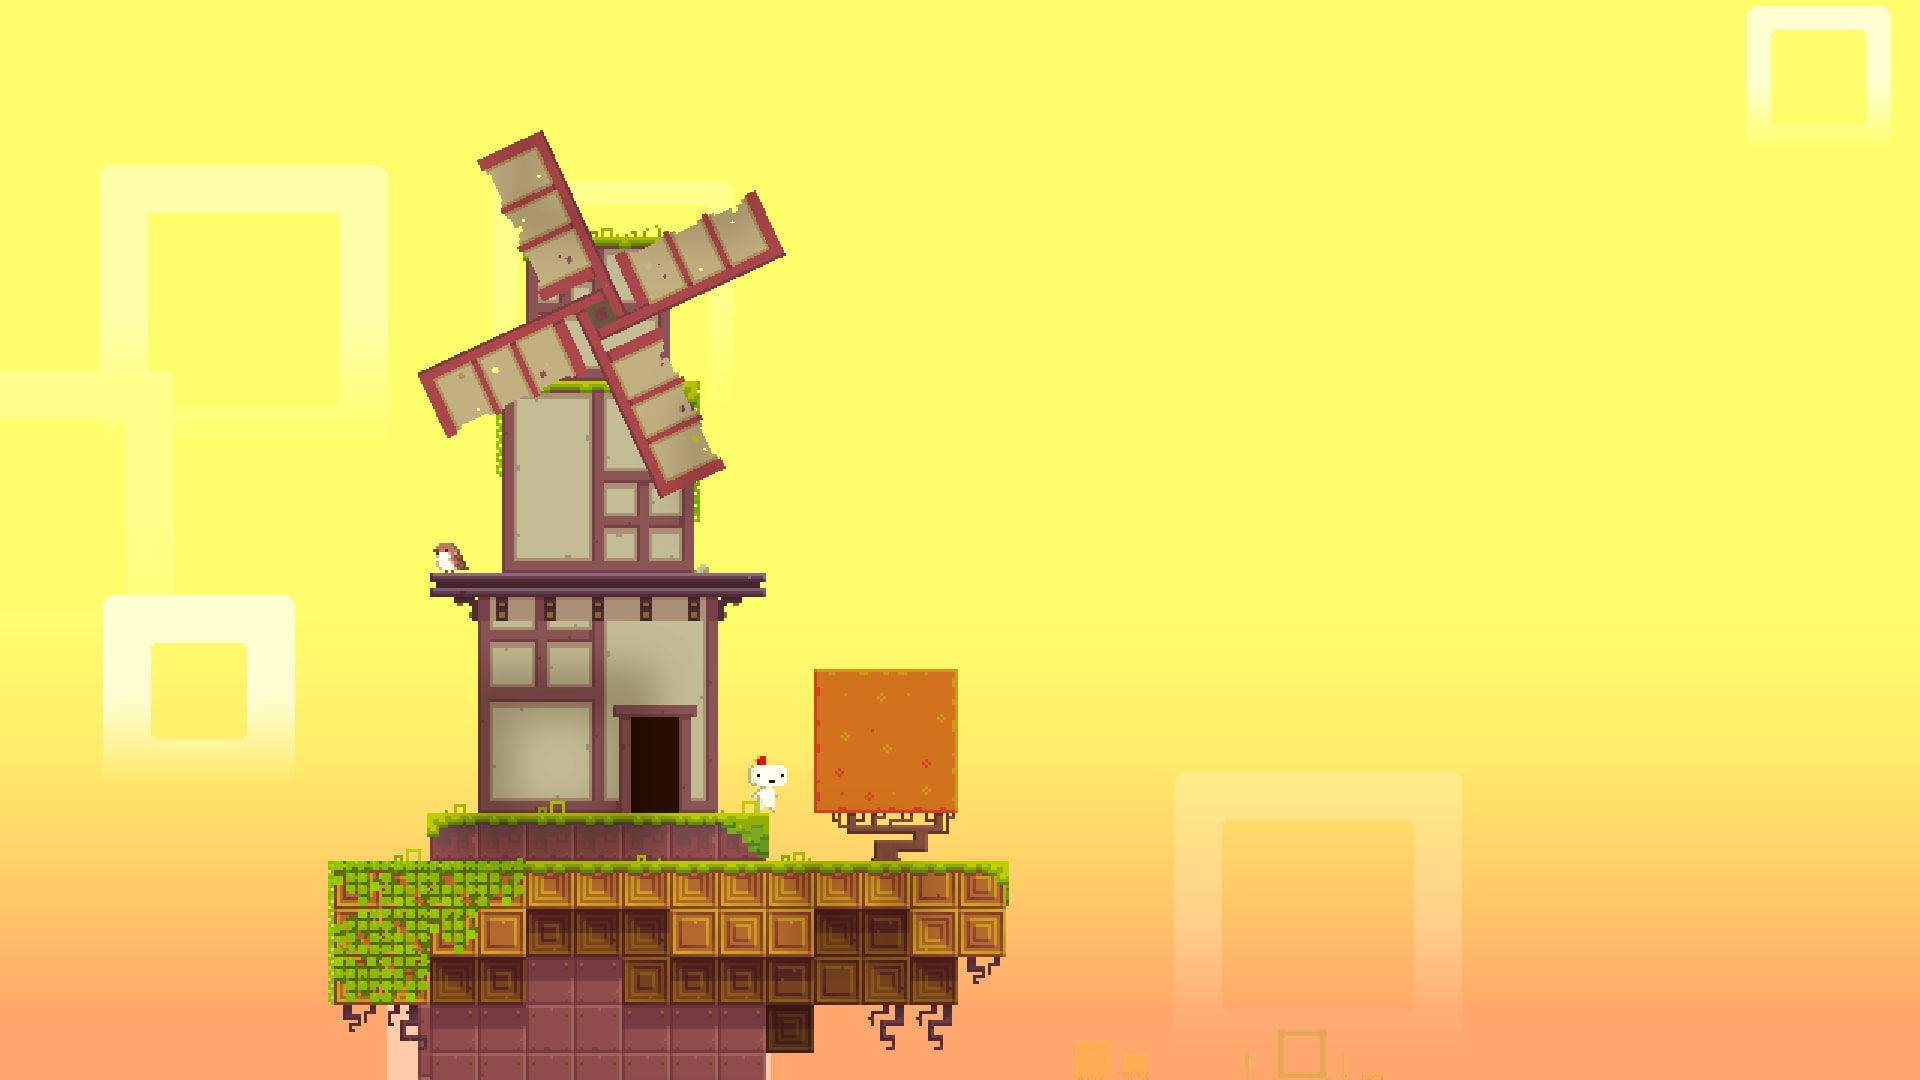 video games, Fez, architecture, built structure, yellow, construction industry